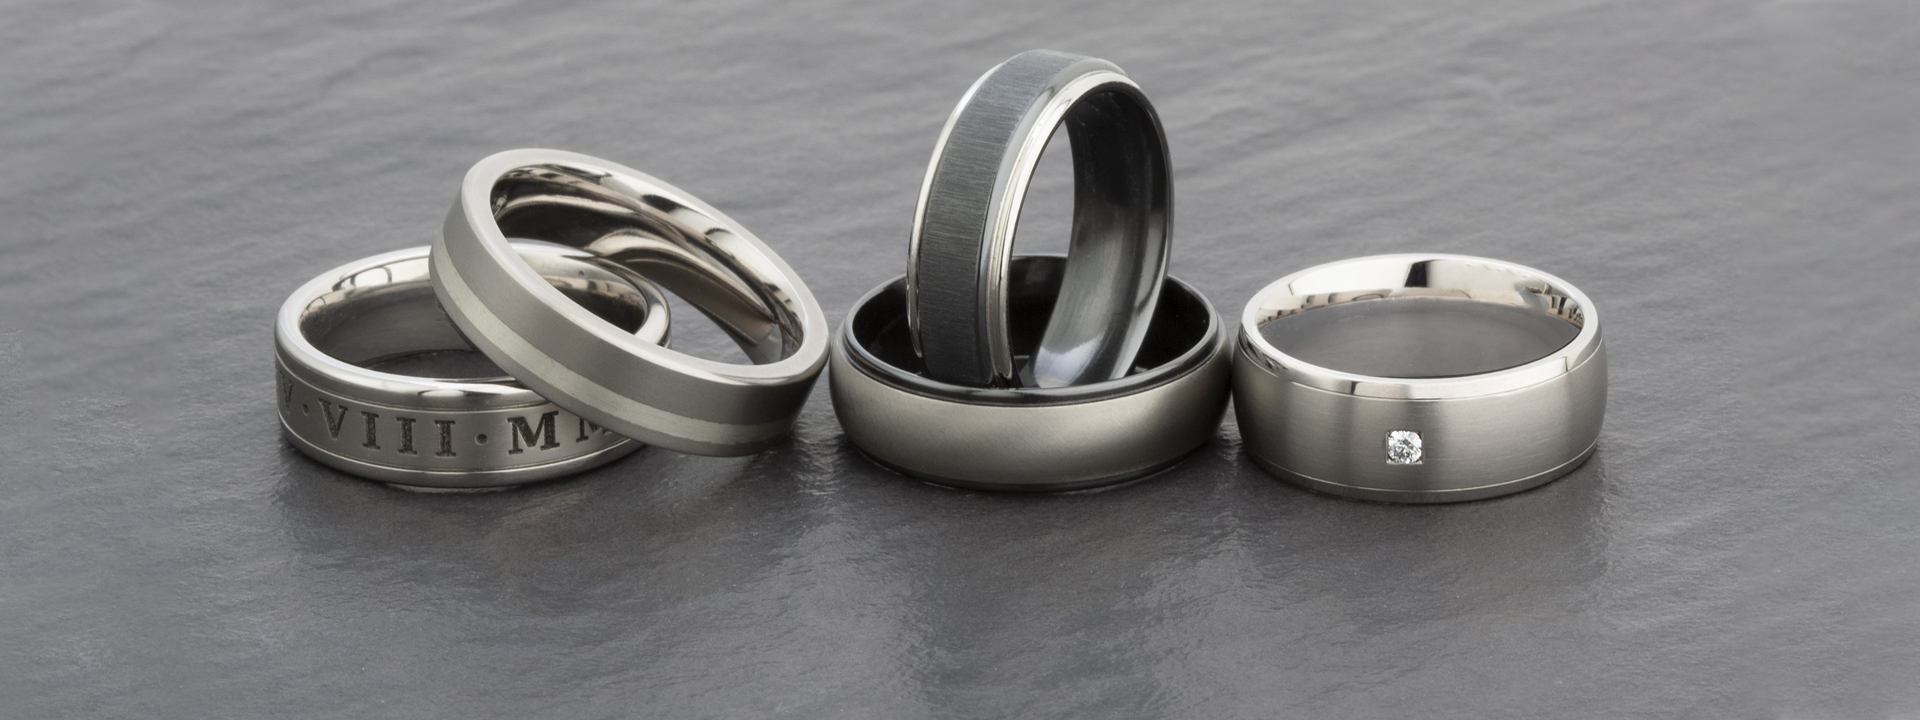 The Significance Of The Titanium Wedding Rings